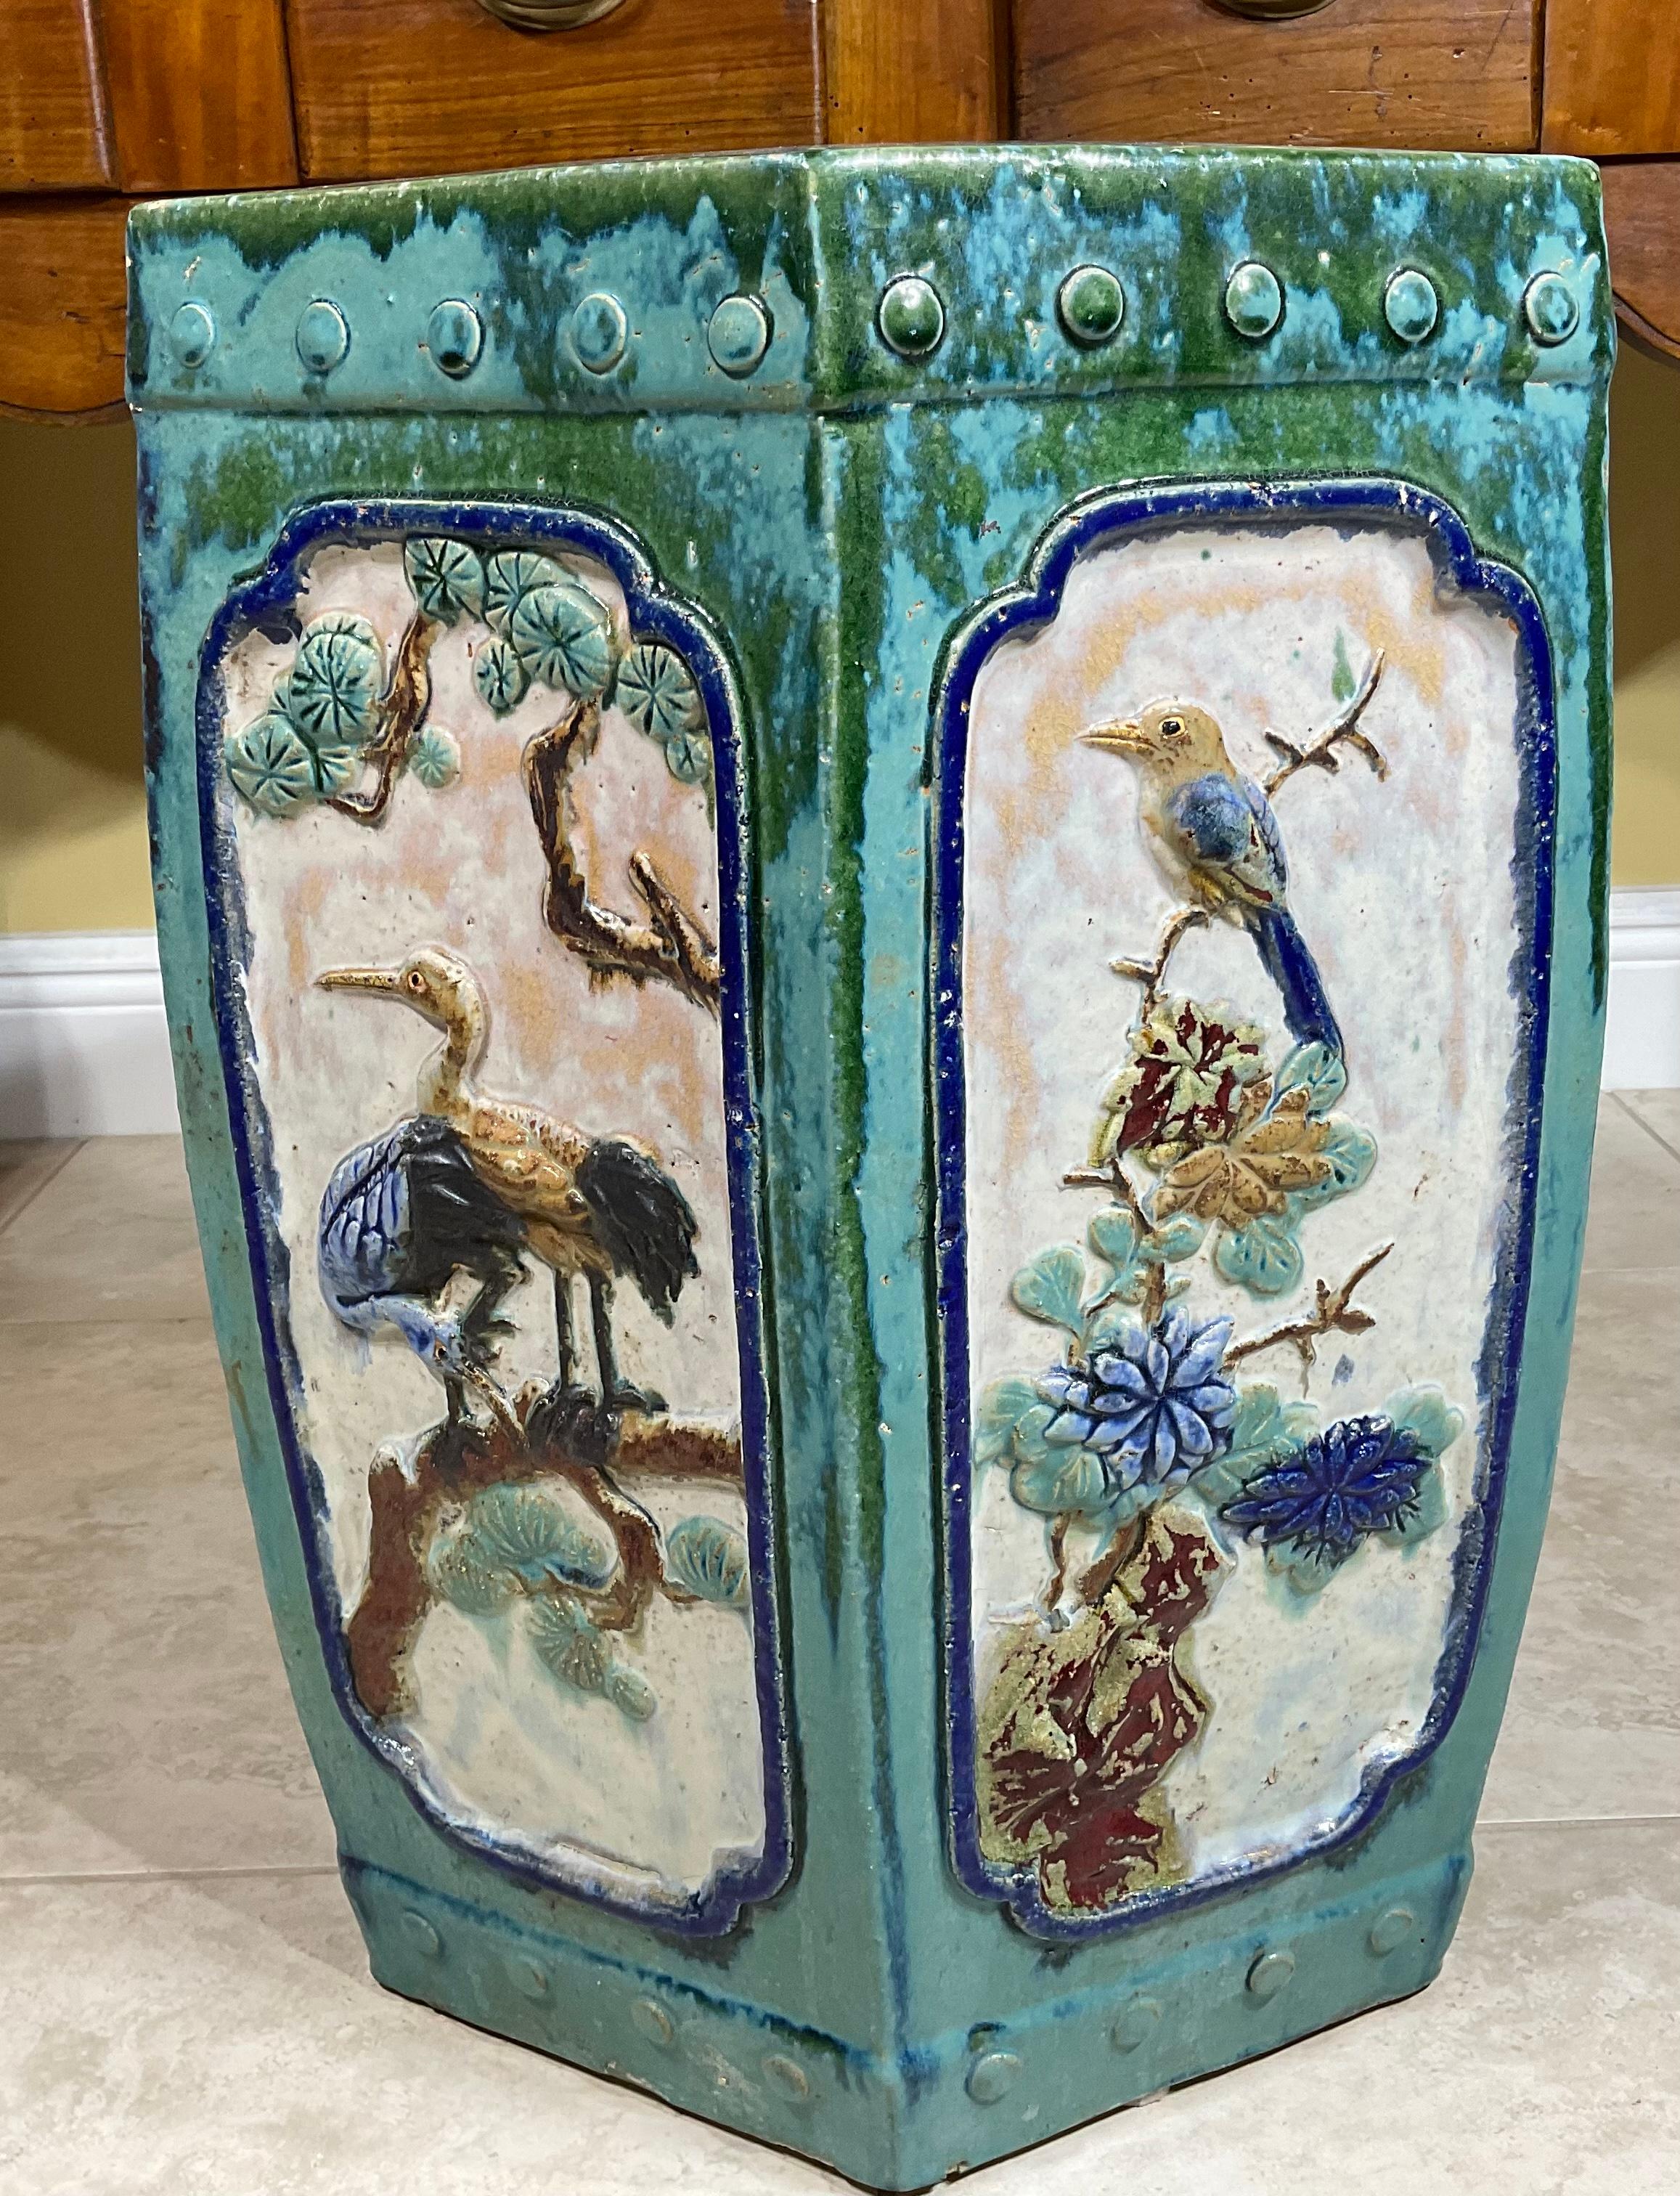 Beautiful six sides garden stool made of ceramic, hand painted and glazed of garden scenery with flowers and birds. Could use in outdoor garden or indoor as small side table.
structurally excellent. Beautiful turquoise and green